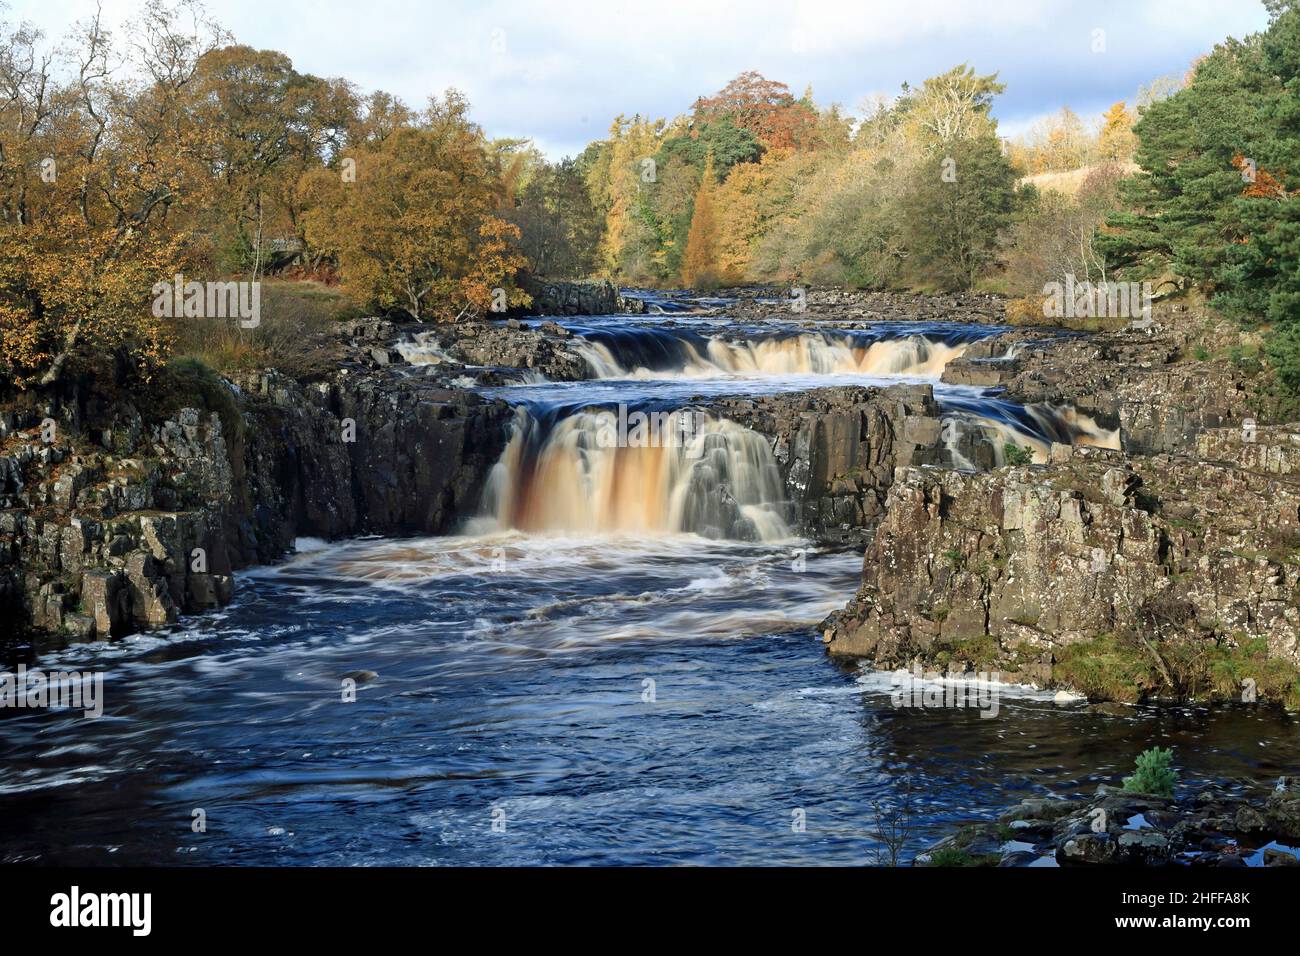 Low Force, a series of small waterfalls on the River Tees. Stock Photo